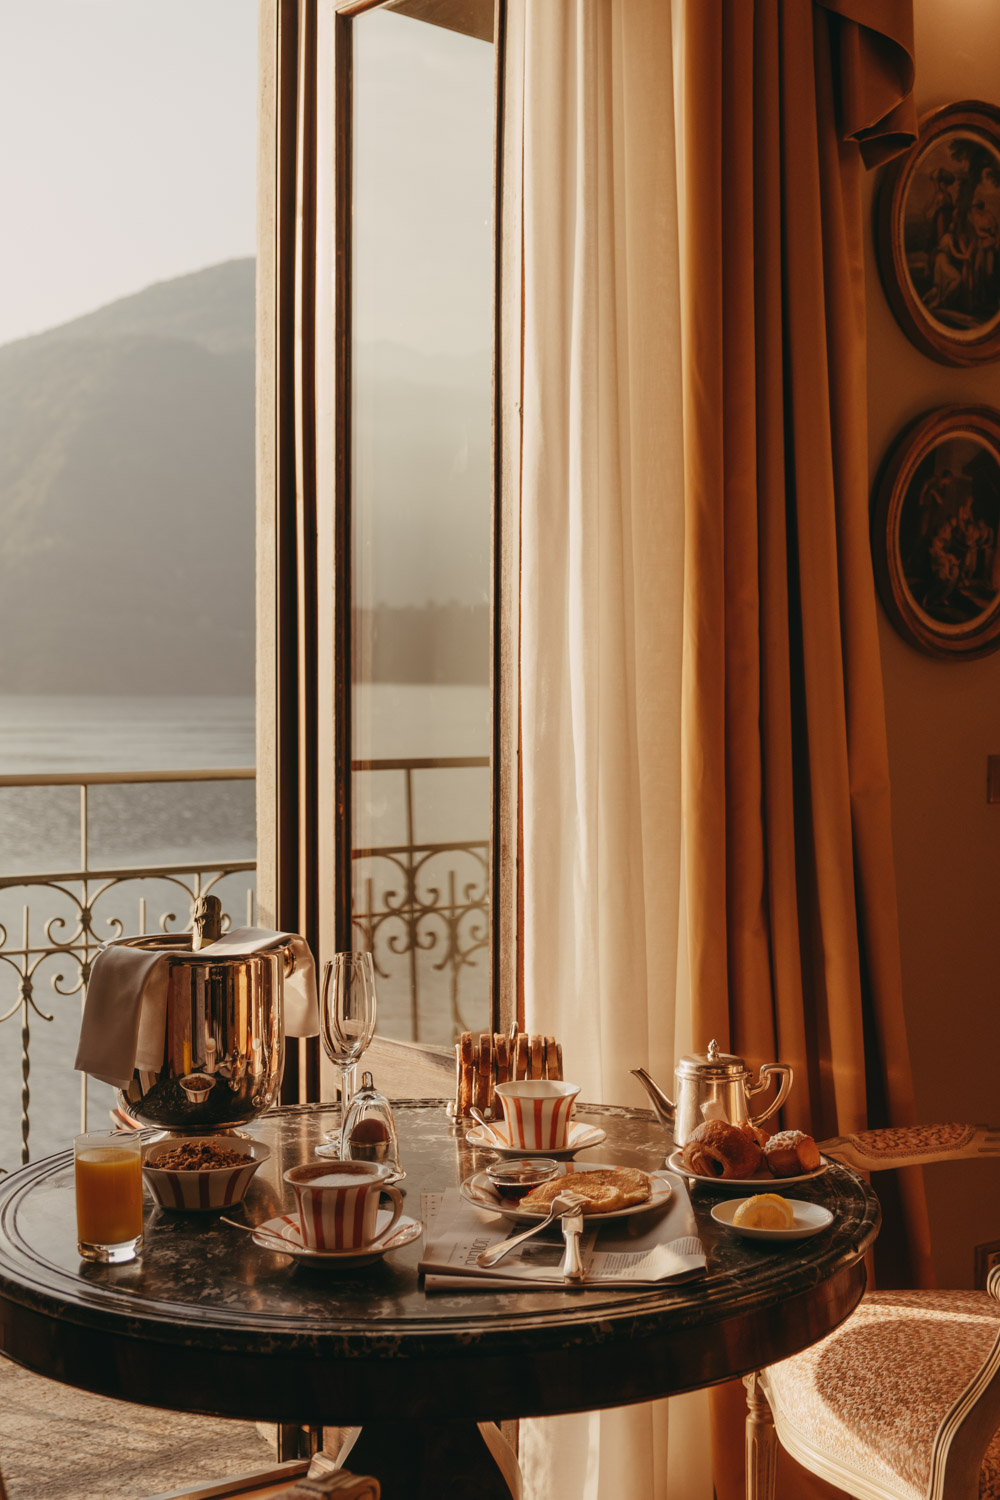 in-room breakfast with views of lake como from grand hotel tremezzo